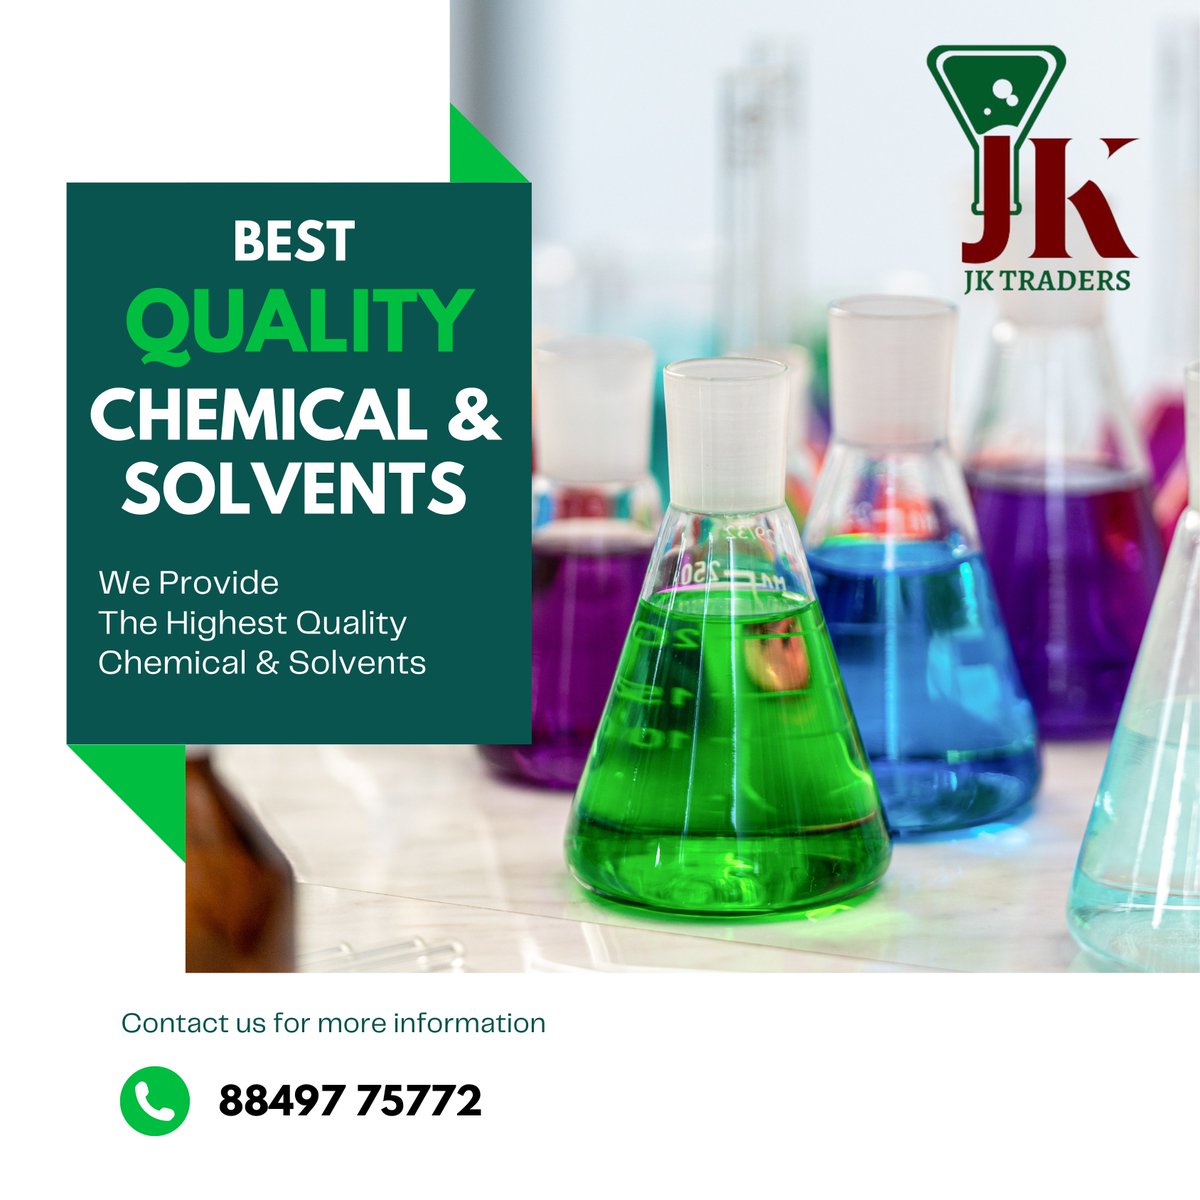 #Chemicals #Solvents #ChemicalSafety #LabSafety
#ChemicalResearch #OrganicChemistry #InorganicChemistry #AnalyticalChemistry #Biochemistry #ChemicalEngineering #SolventExtraction #GreenChemistry #HazardousMaterials #ChemicalProcessing #ChemicalManufacturing #ChemicalIndustry